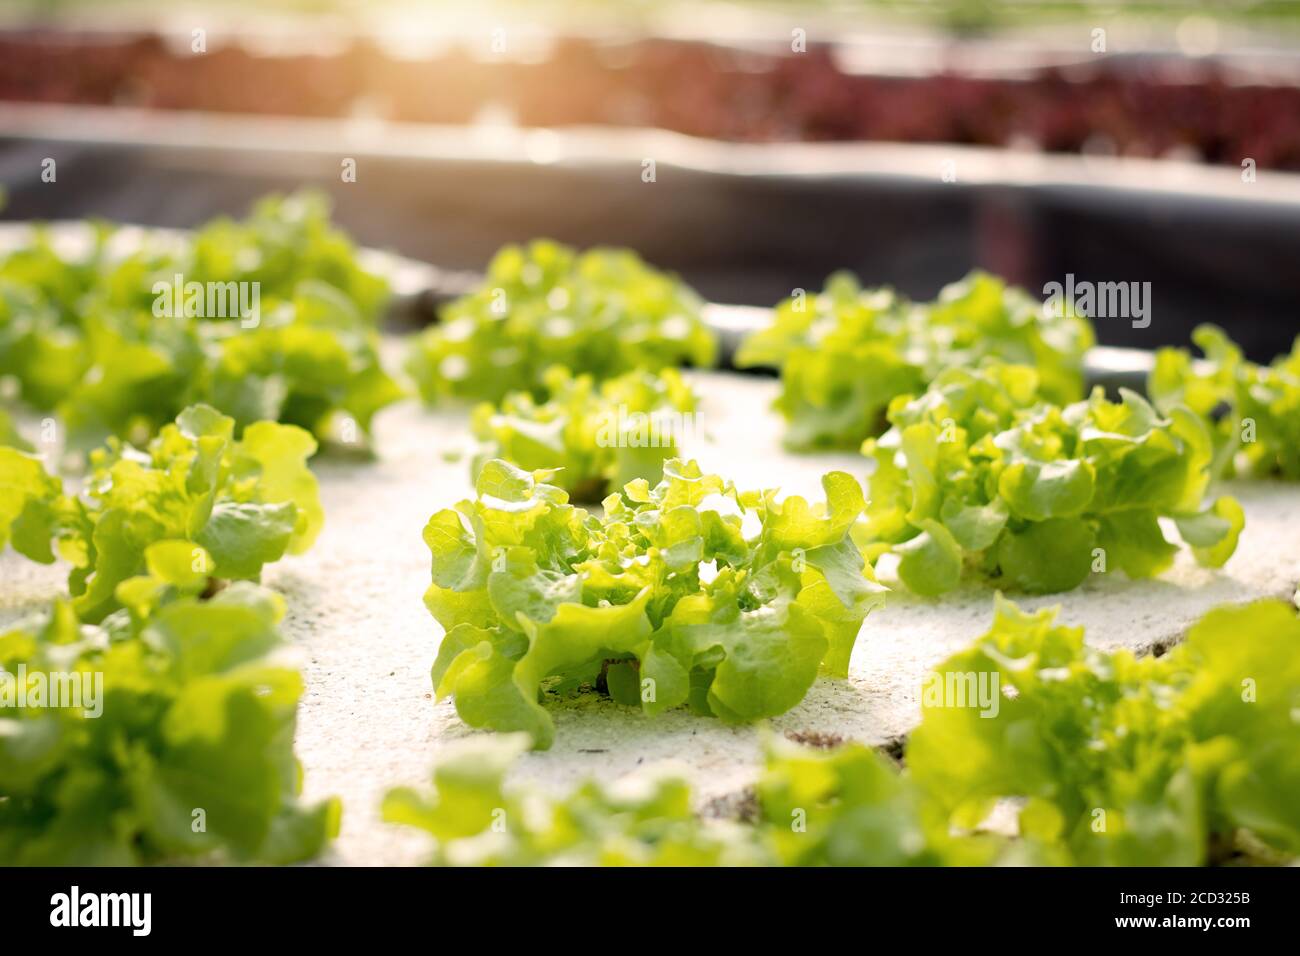 Vegetables hydroponics. Hydroponics method of growing plants using mineral nutrient solutions, in water, without soil. Close up Hydroponics plant. Stock Photo